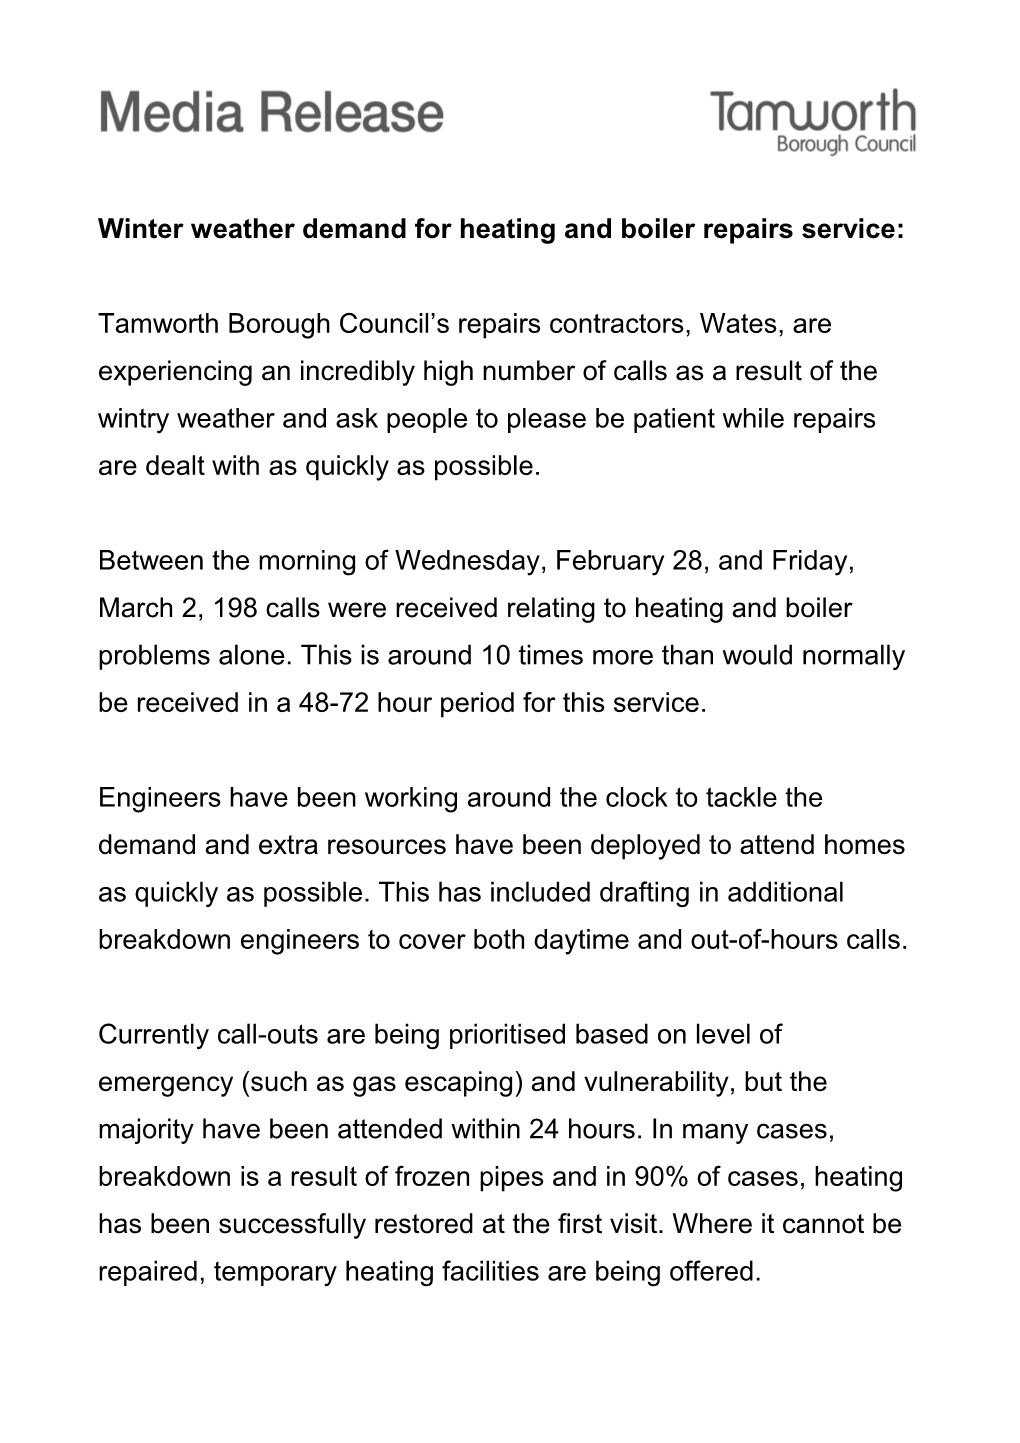 Winter Weather Demand for Heating and Boiler Repairs Service